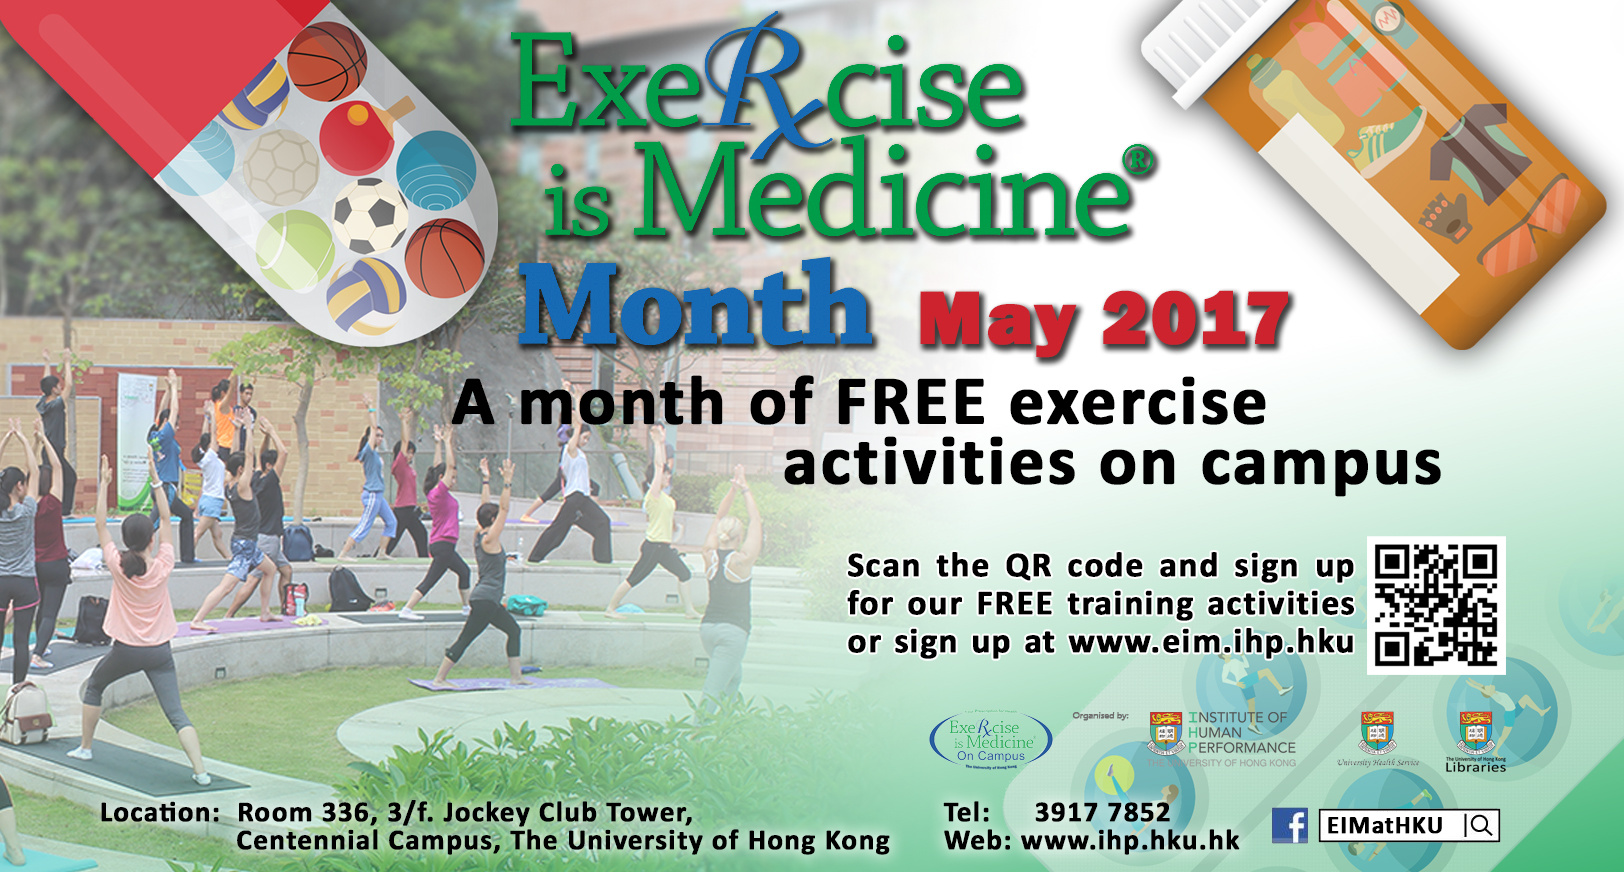 Exercise is Medicine on Campus Month - University of Hong Kong